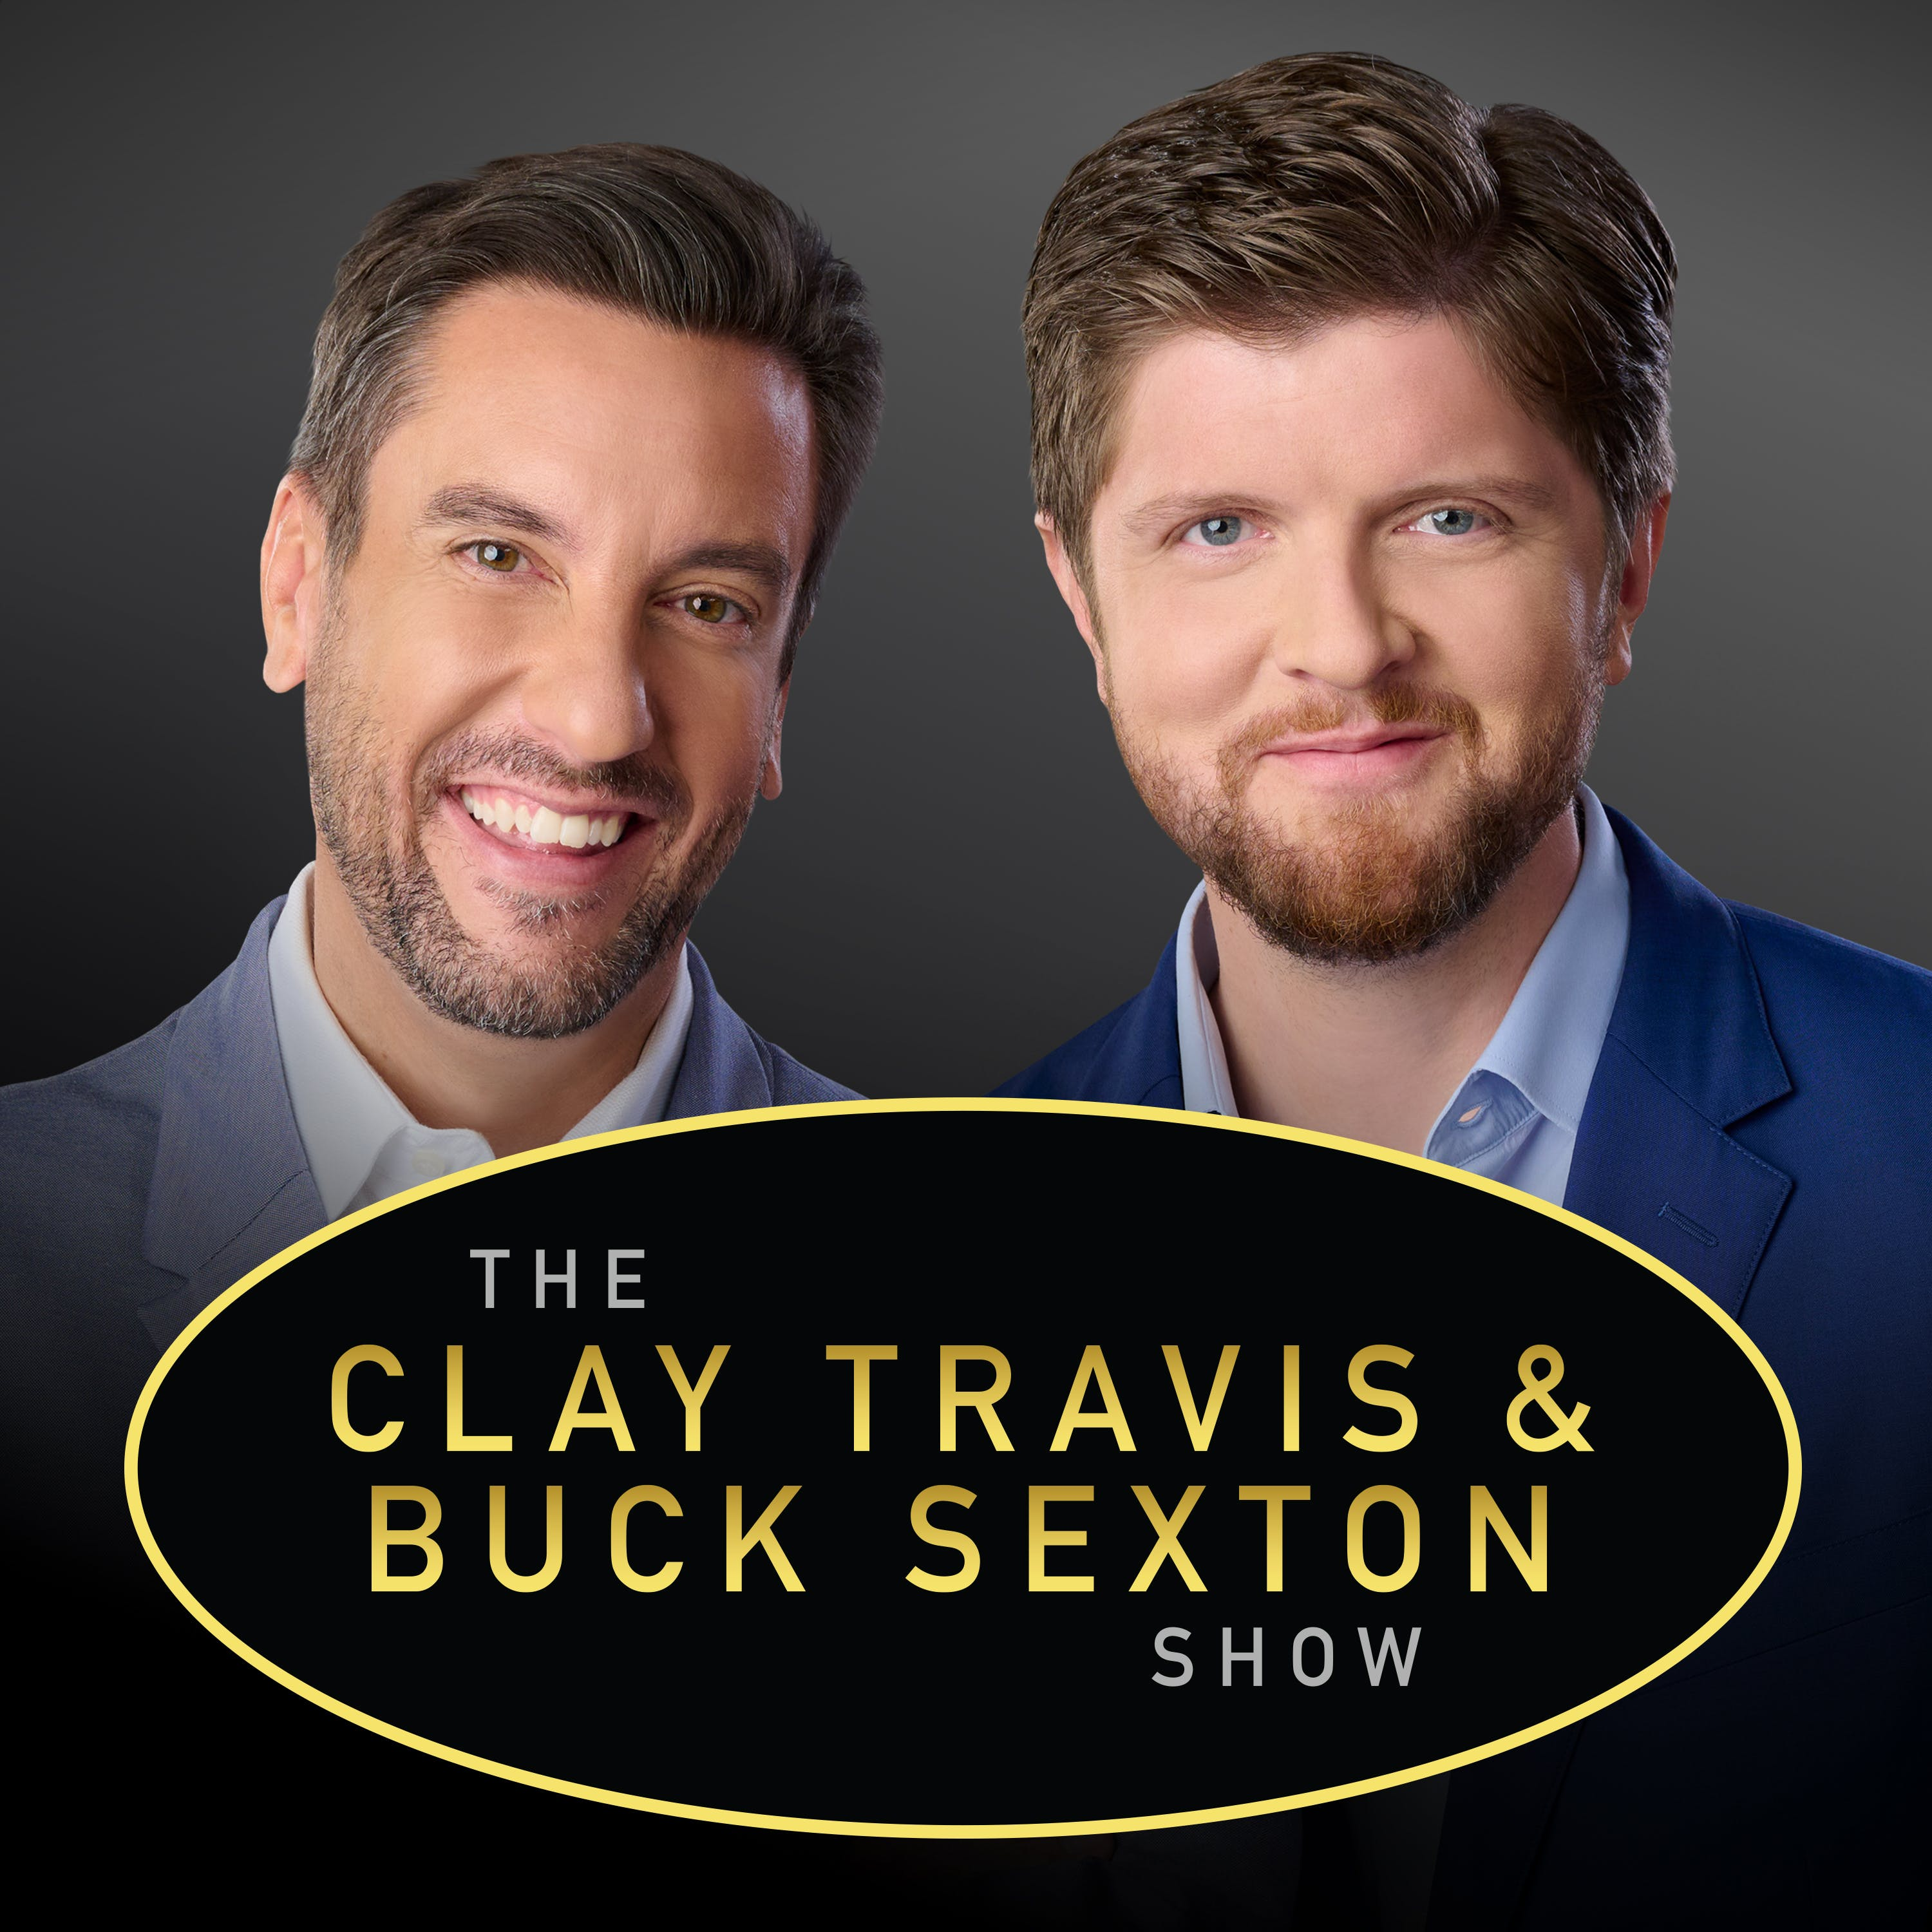 Clay Travis and Buck Sexton Show H2 – Sep 9 2021